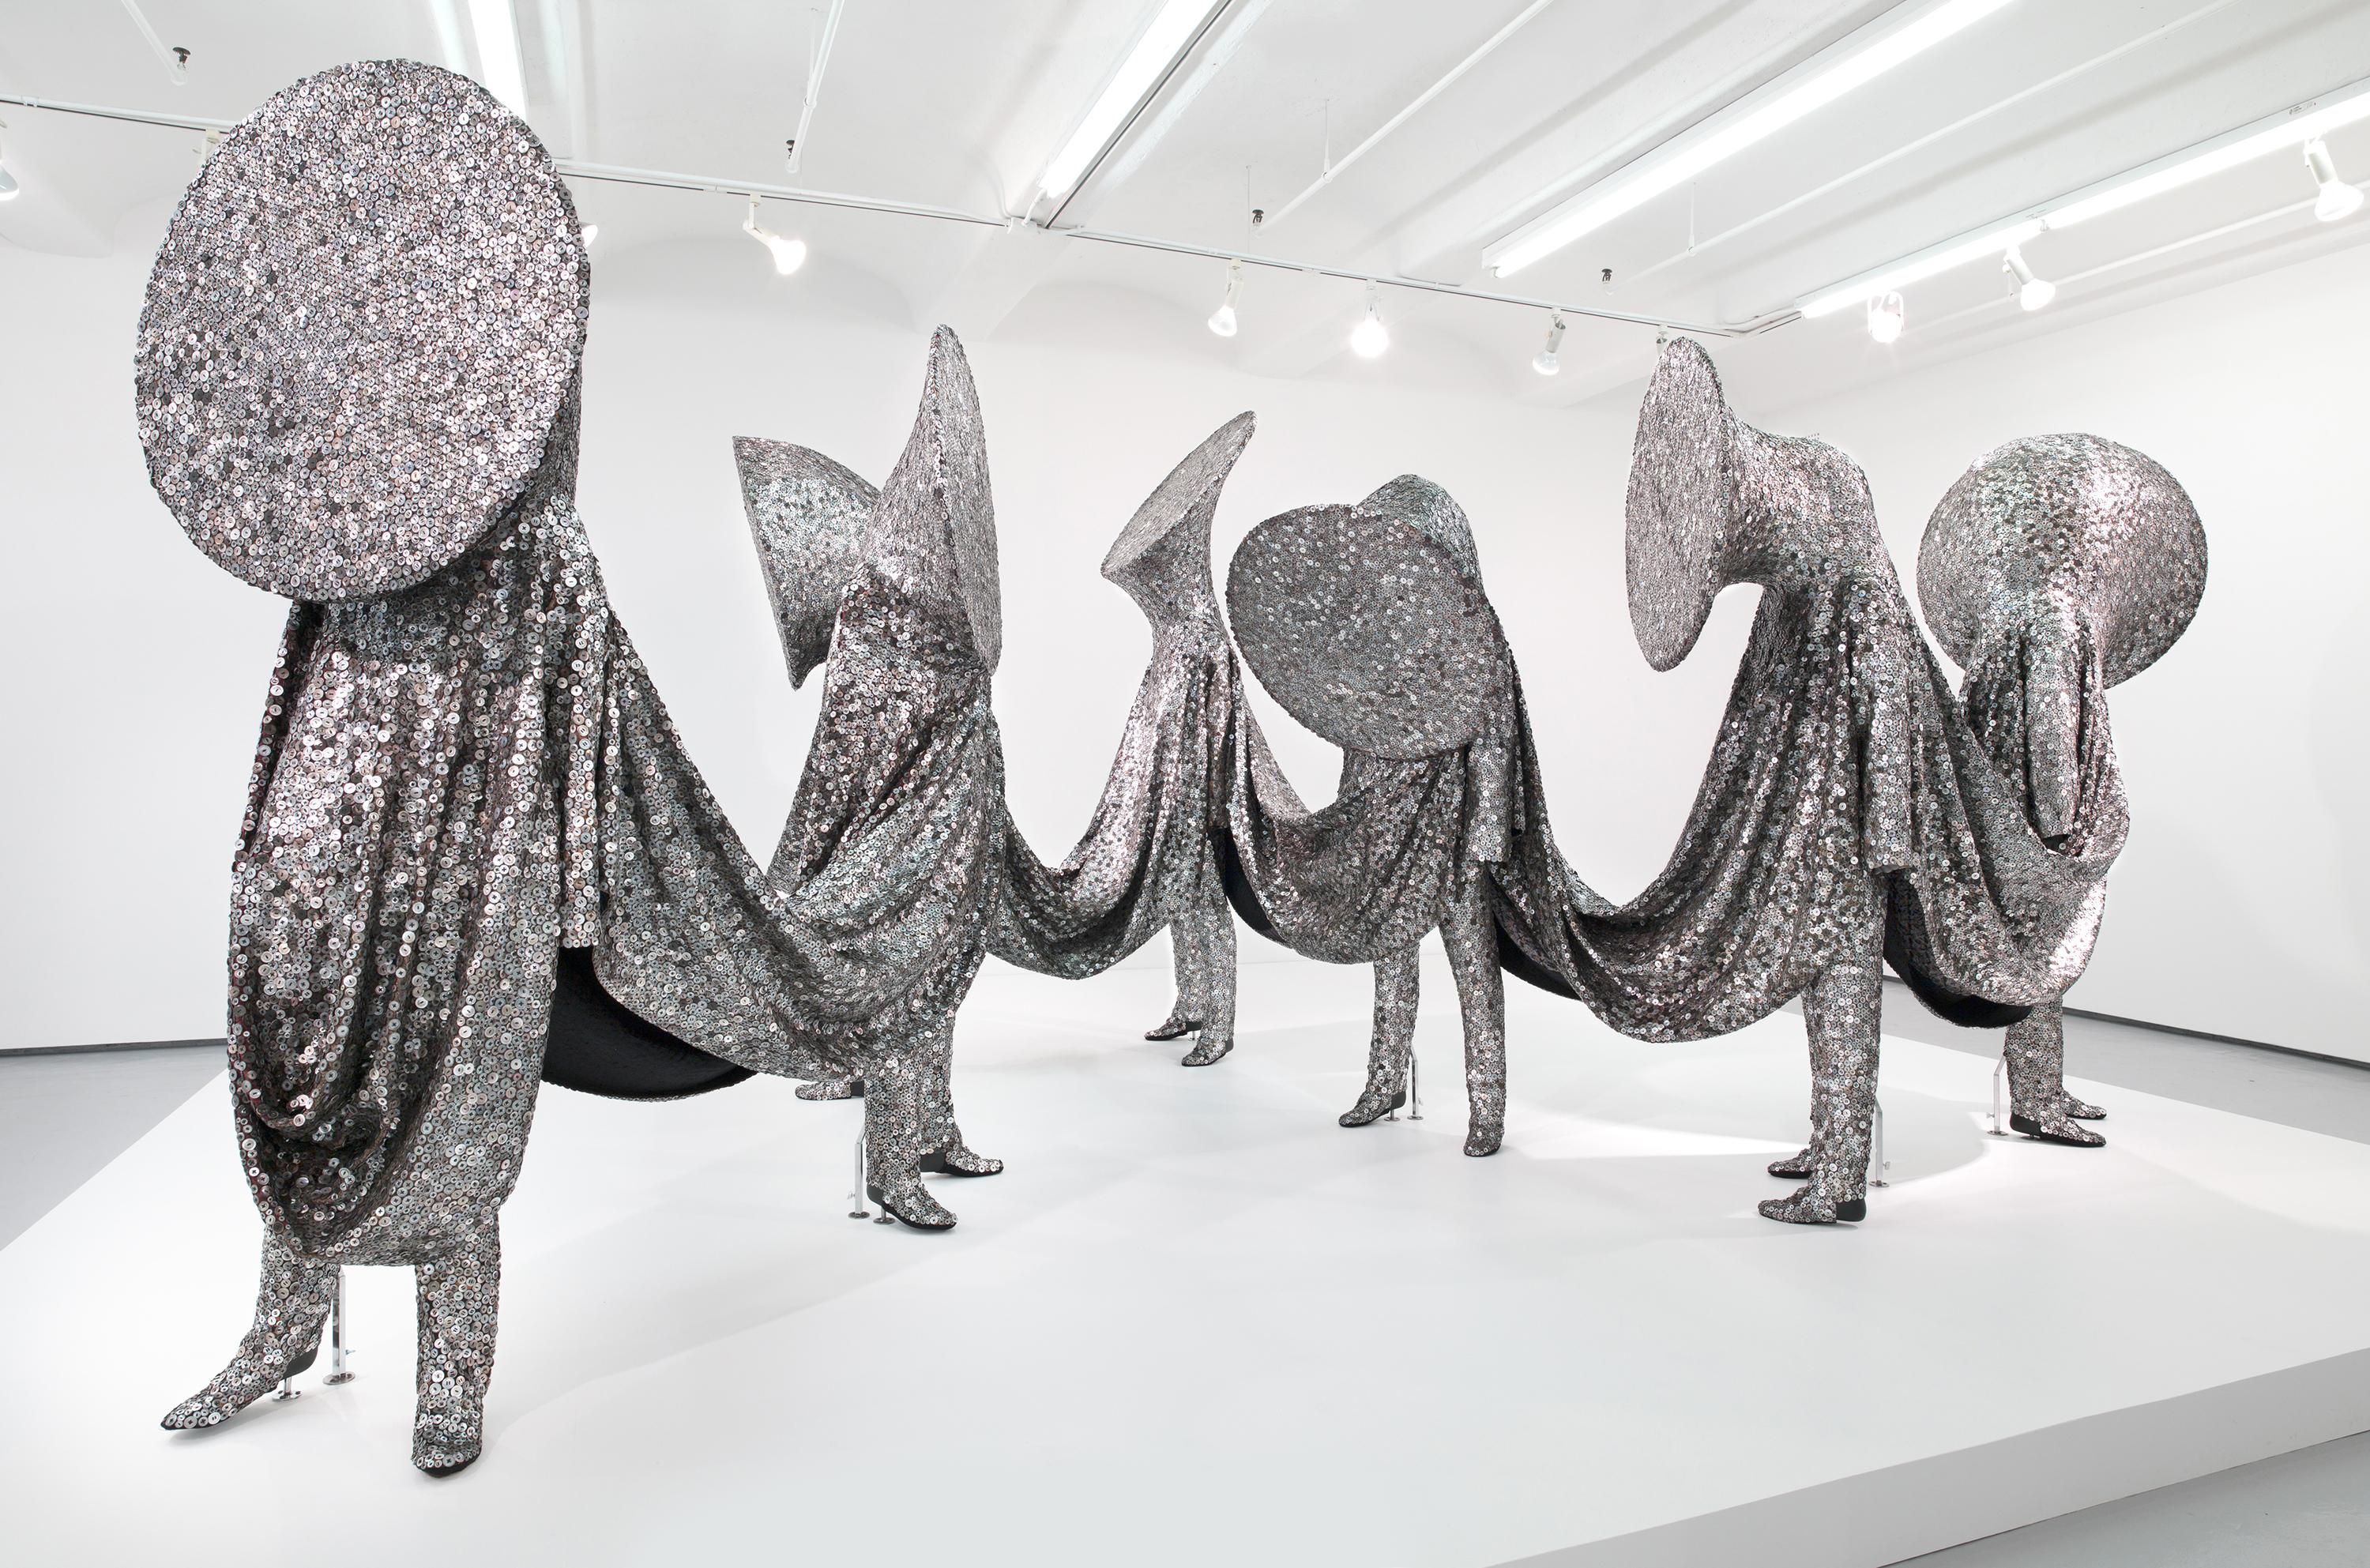 Seven human figures with brass instrument heads are entirely covered in a shiny silver sequined fabric that connects each of them.